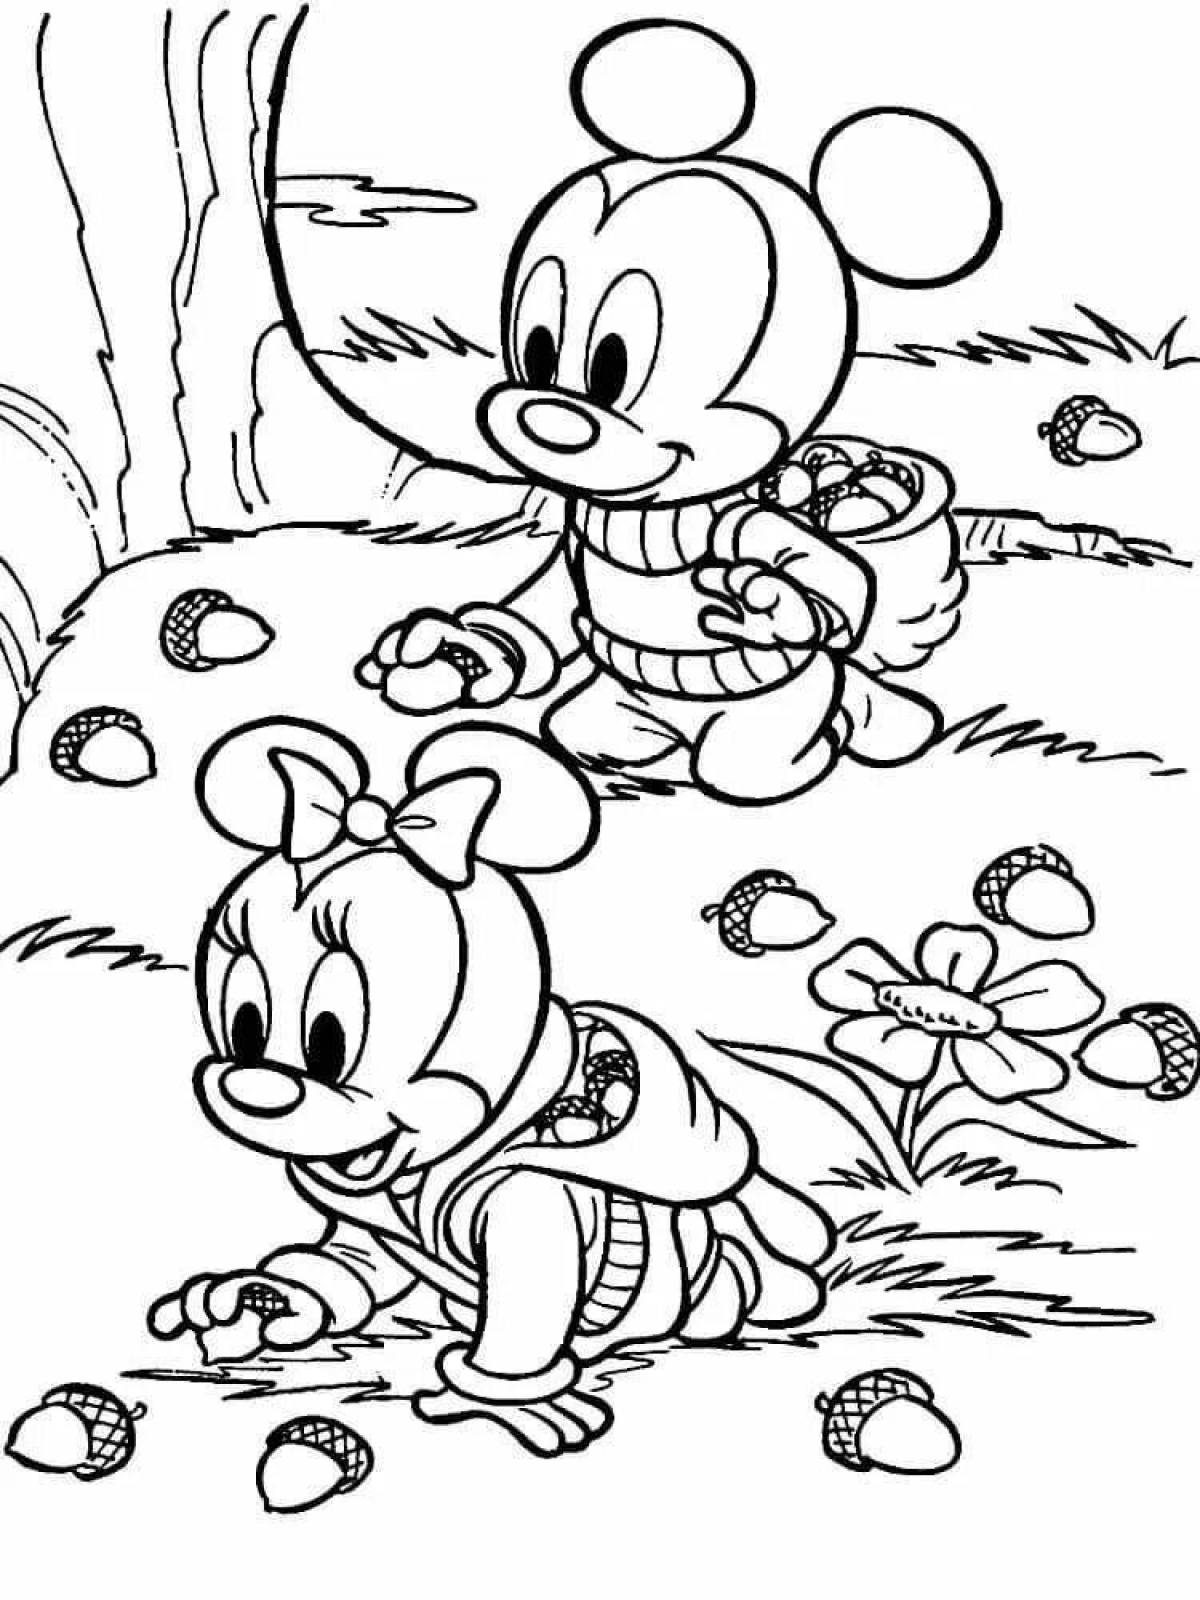 Colour-loving coloring book for children from cartoons 6-7 years old